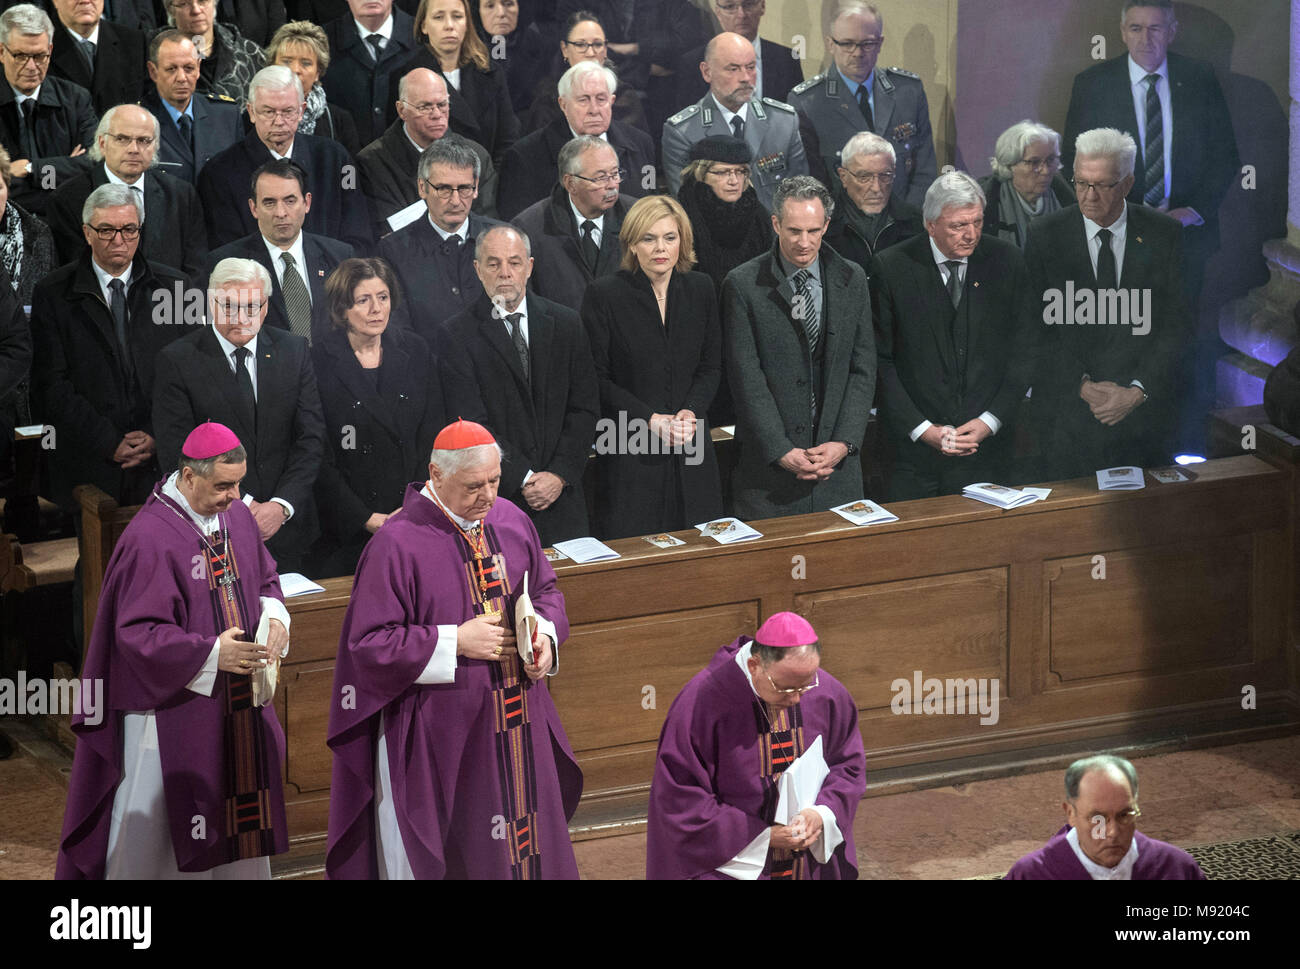 Mainz, Germany.  21 March 2018, The requiem for Cardinal Karl Lehmann, former bishop of Mainz, at Mainz cathedral. In the first row the honorary guests: German President Frank-Walter Steinmeier (L-R), Malu Dreyer of the Social Democratic Party (SPD), Premier of Rhineland-Palatinate, her husband Klaus Jensen, Julia Kloeckner of the Christian Democratic Union (CDU), German Minister Food and Agriculture, her partner (name unknown), Volker Bouffier (CDU), Premier of Hesse, and Winfried Kretschmann (Alliance 90/The Greens), Premier of Baden-Wuerttemberg. Credit: dpa picture alliance/Alamy Live News Stock Photo